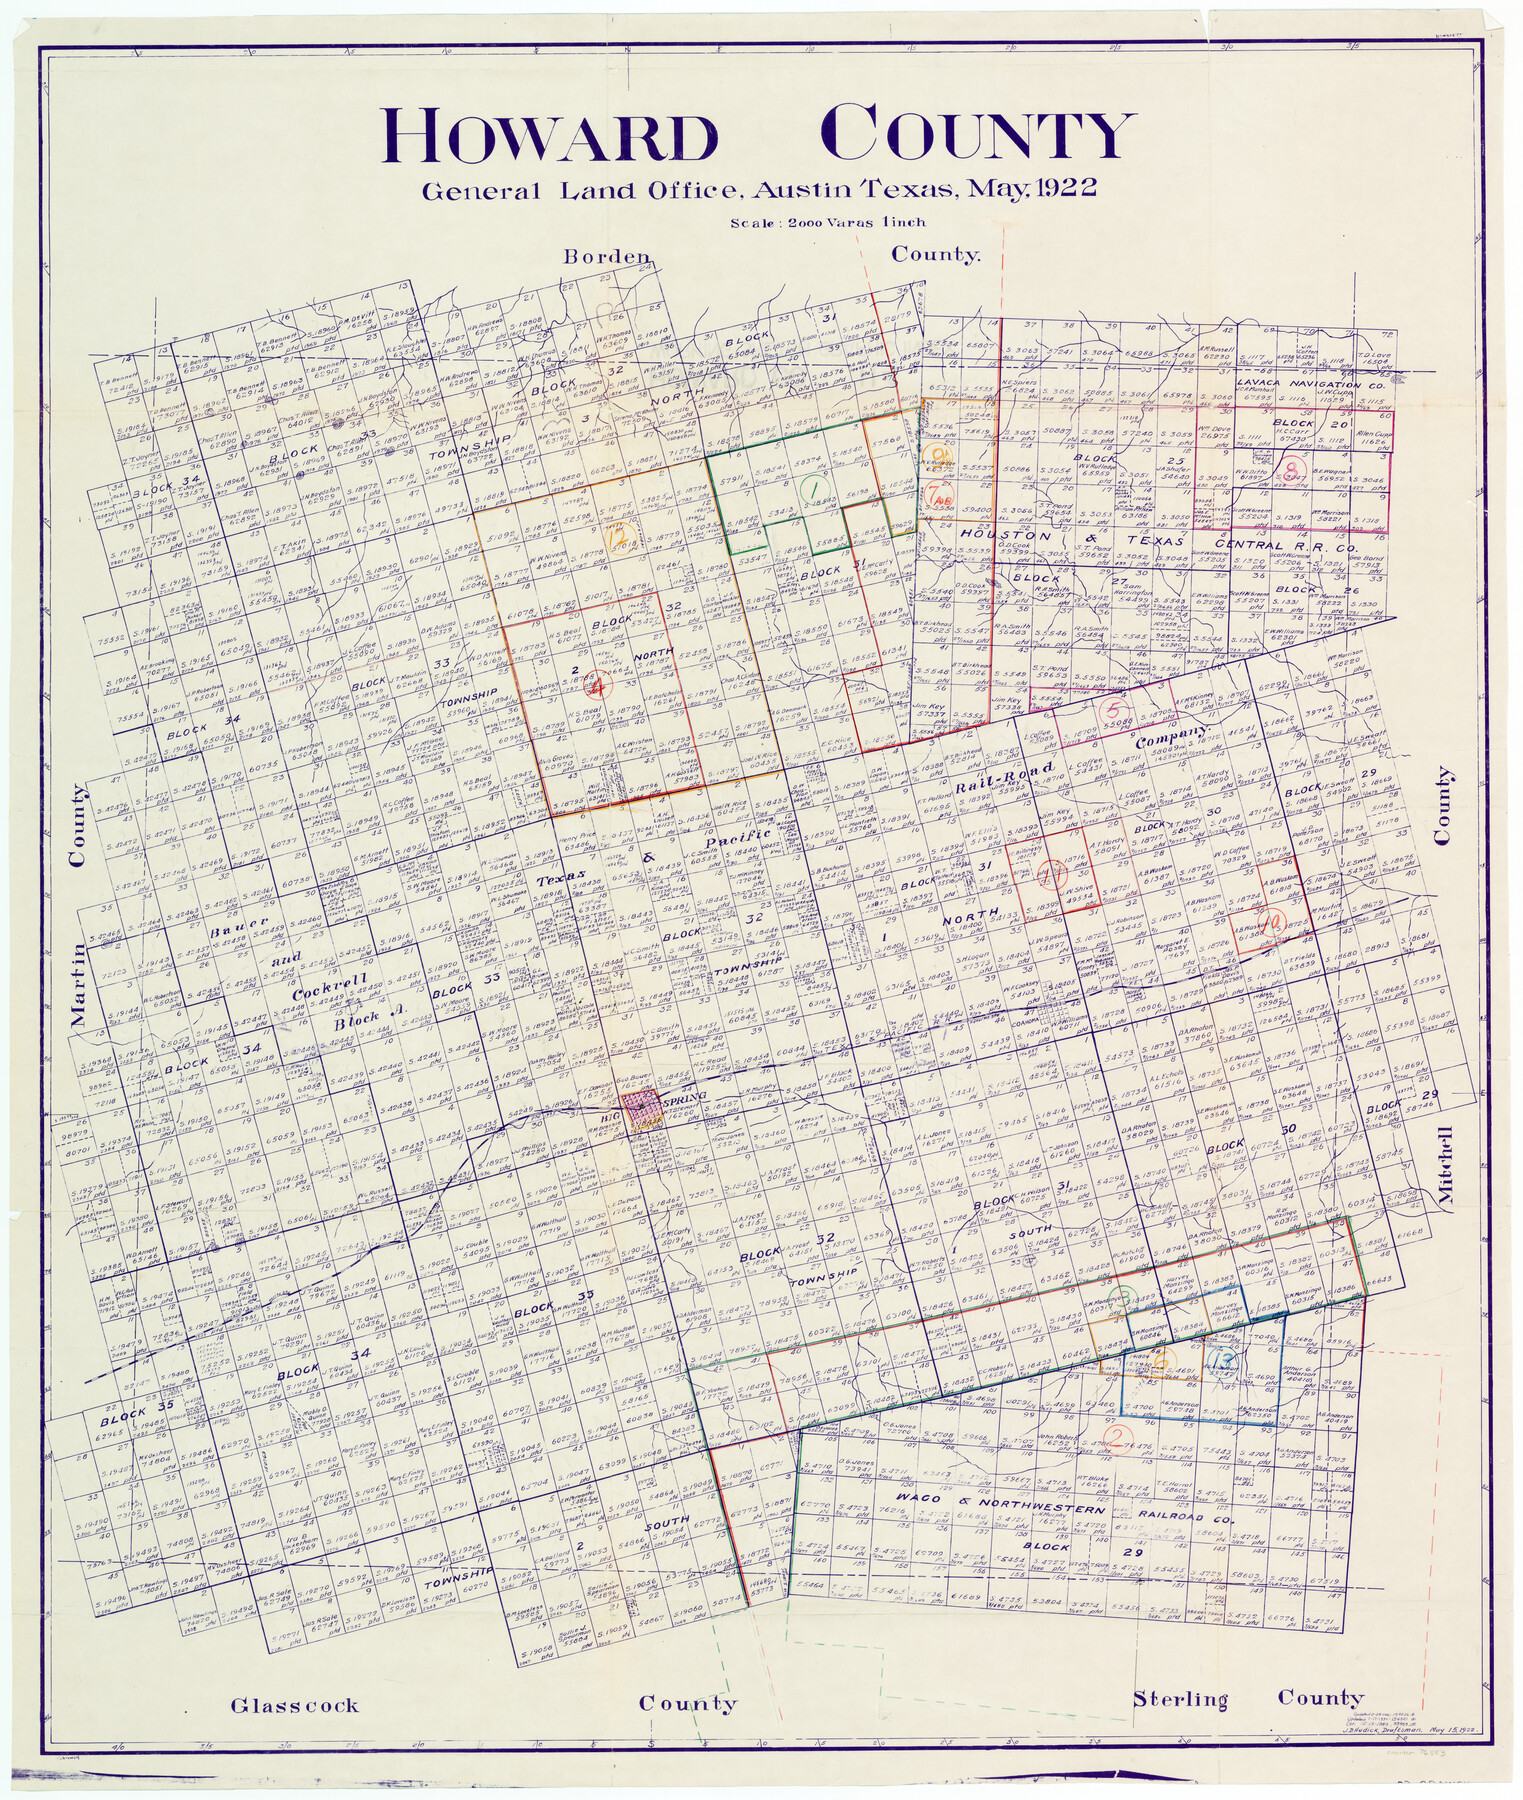 76583, Howard County Working Sketch Graphic Index, General Map Collection